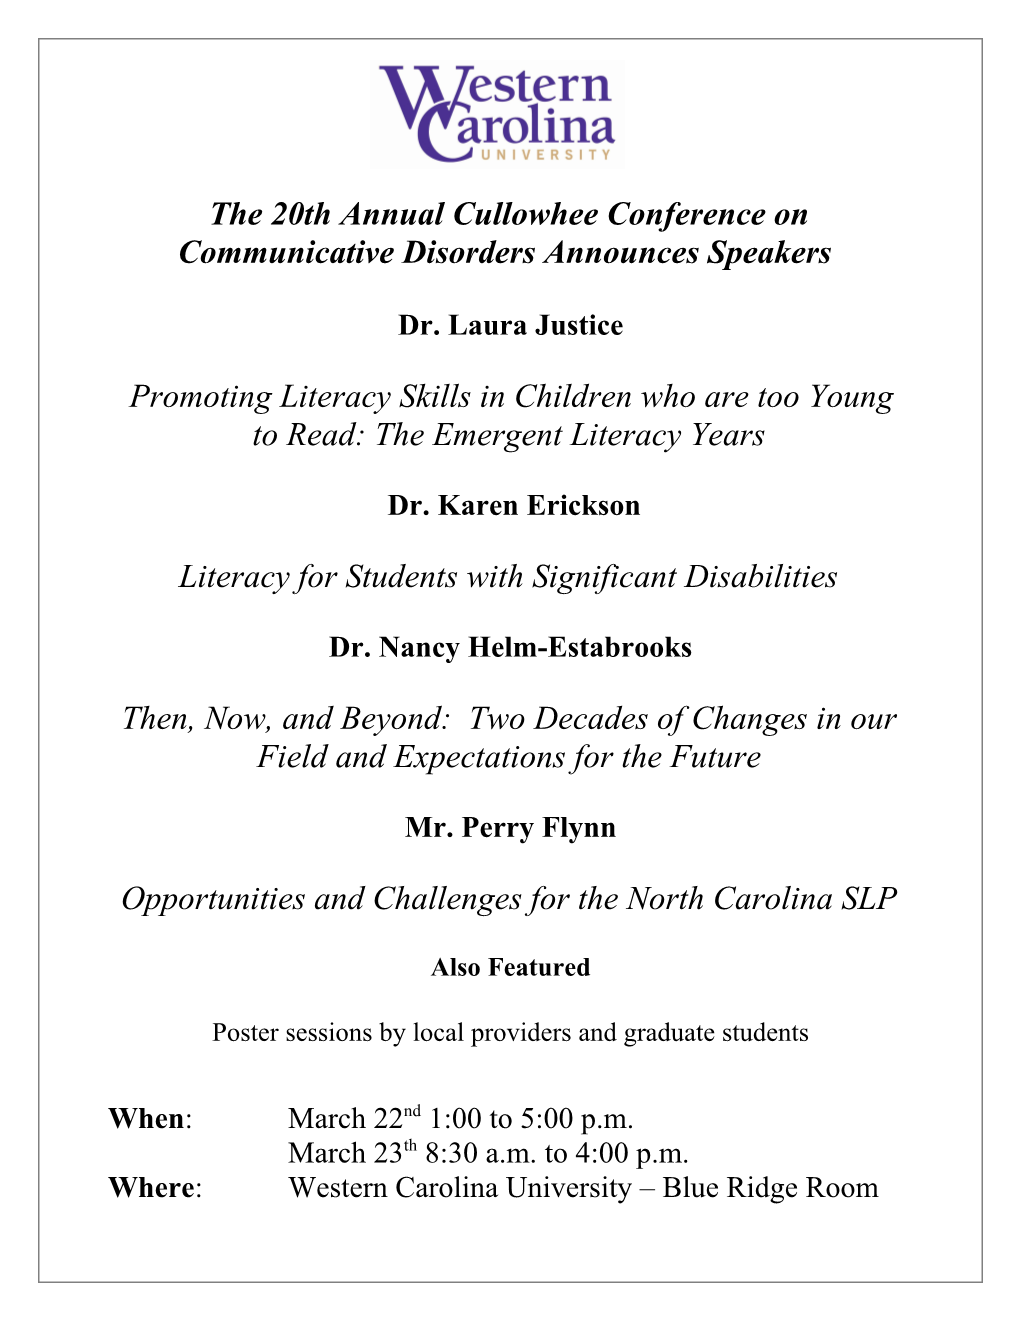 The 20Th Annual Cullowhee Conference on Communicative Disorders Announces Speakers